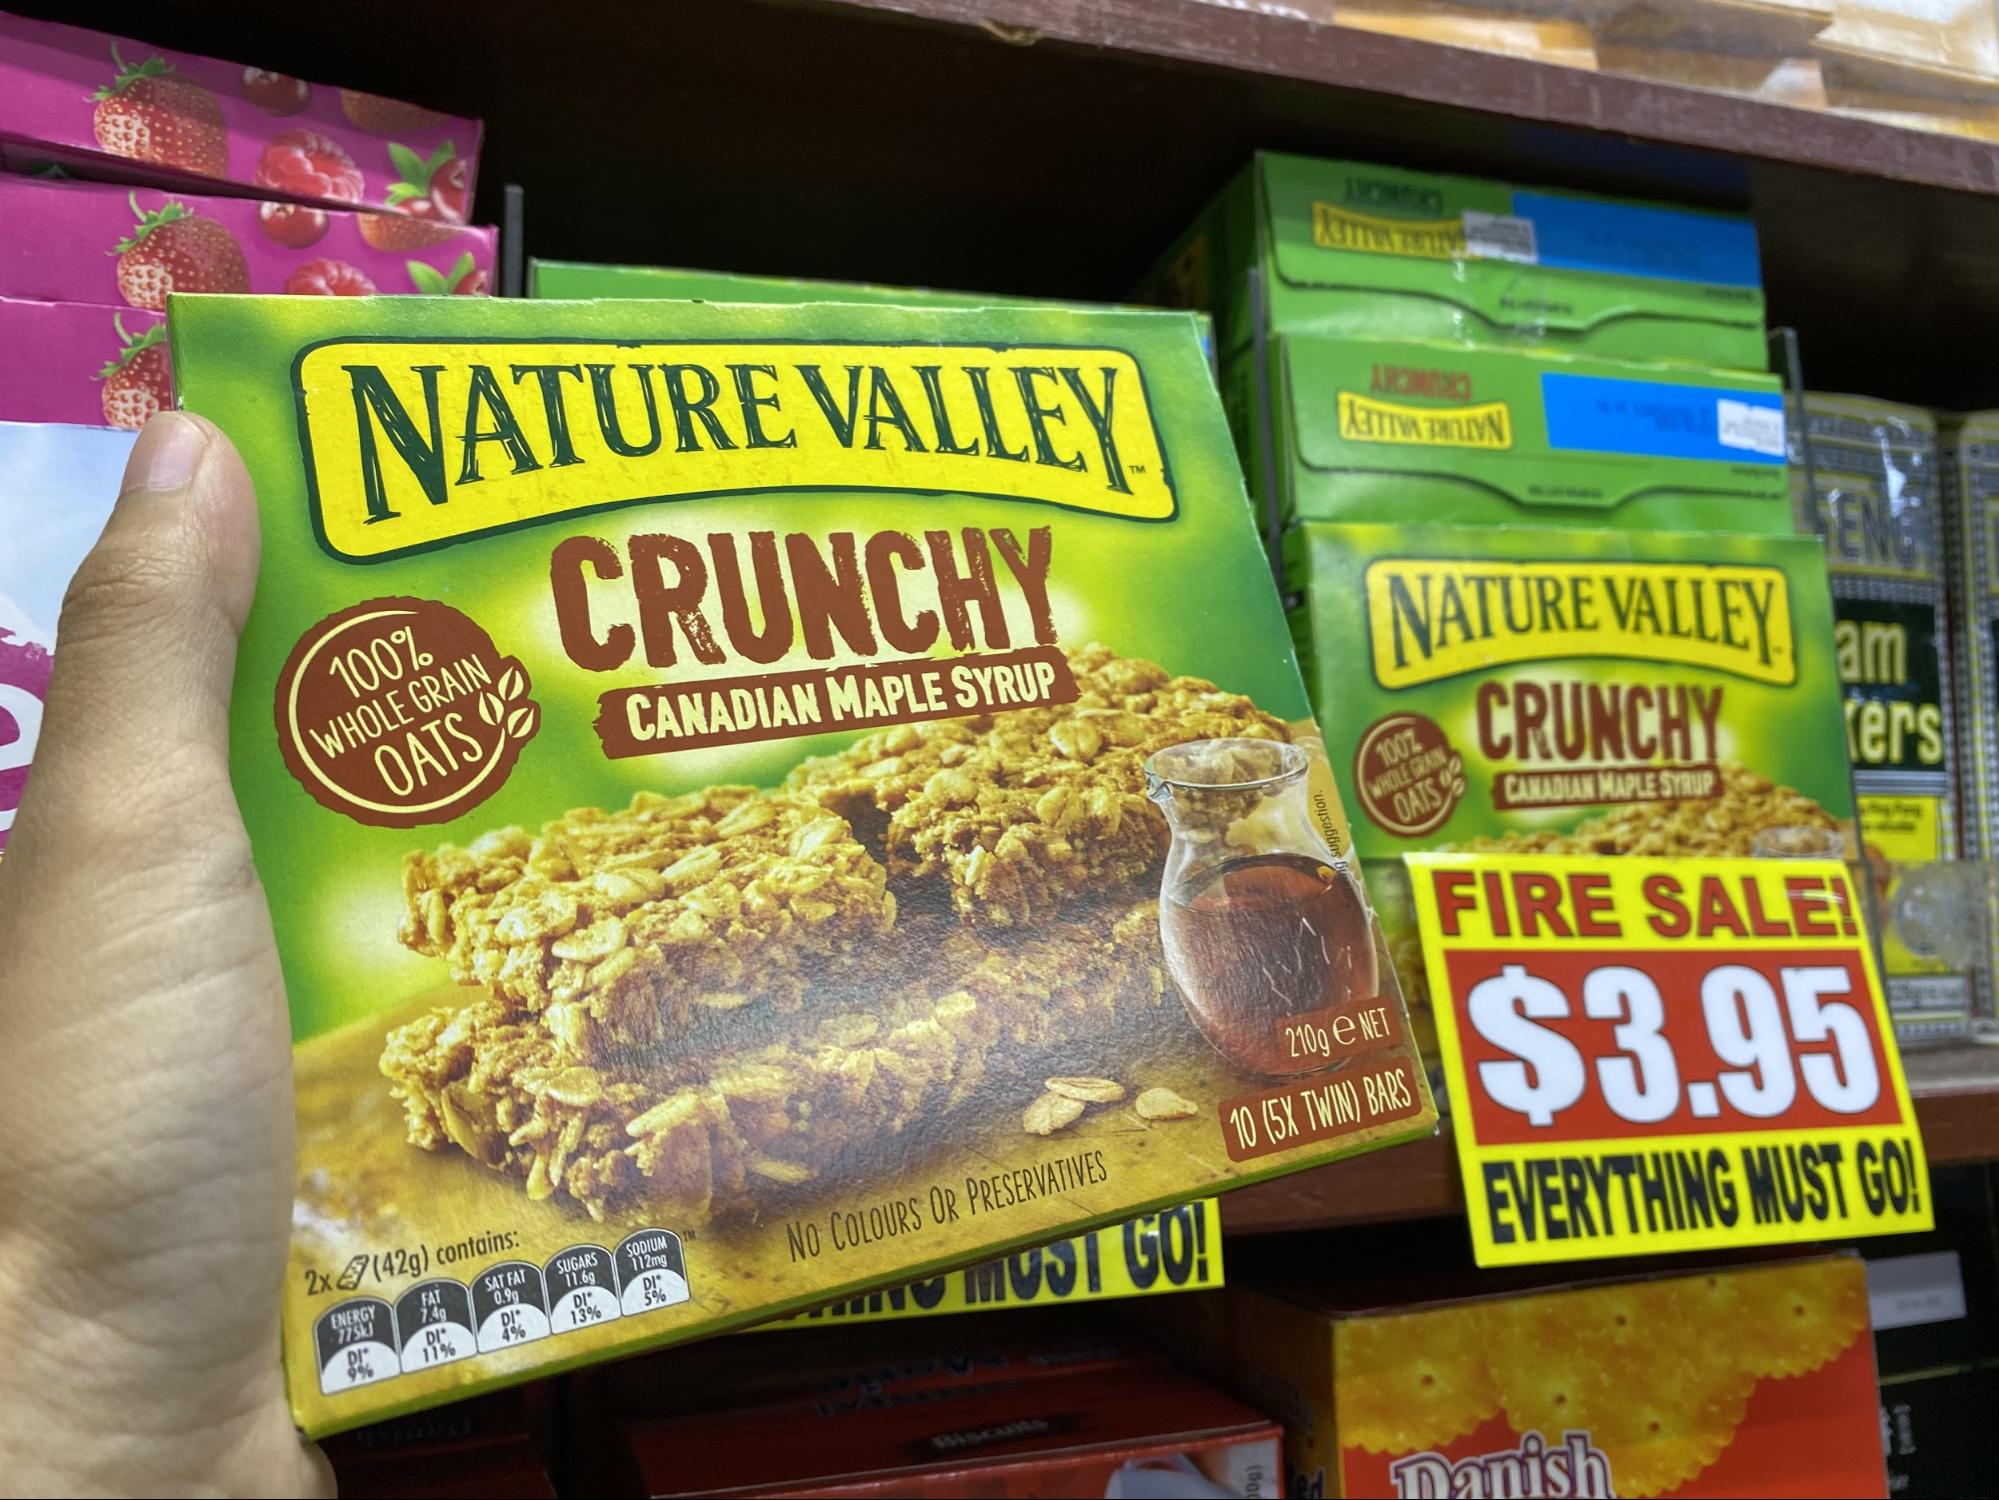 Nature Valley granola bars at the value dollar store in Singapore